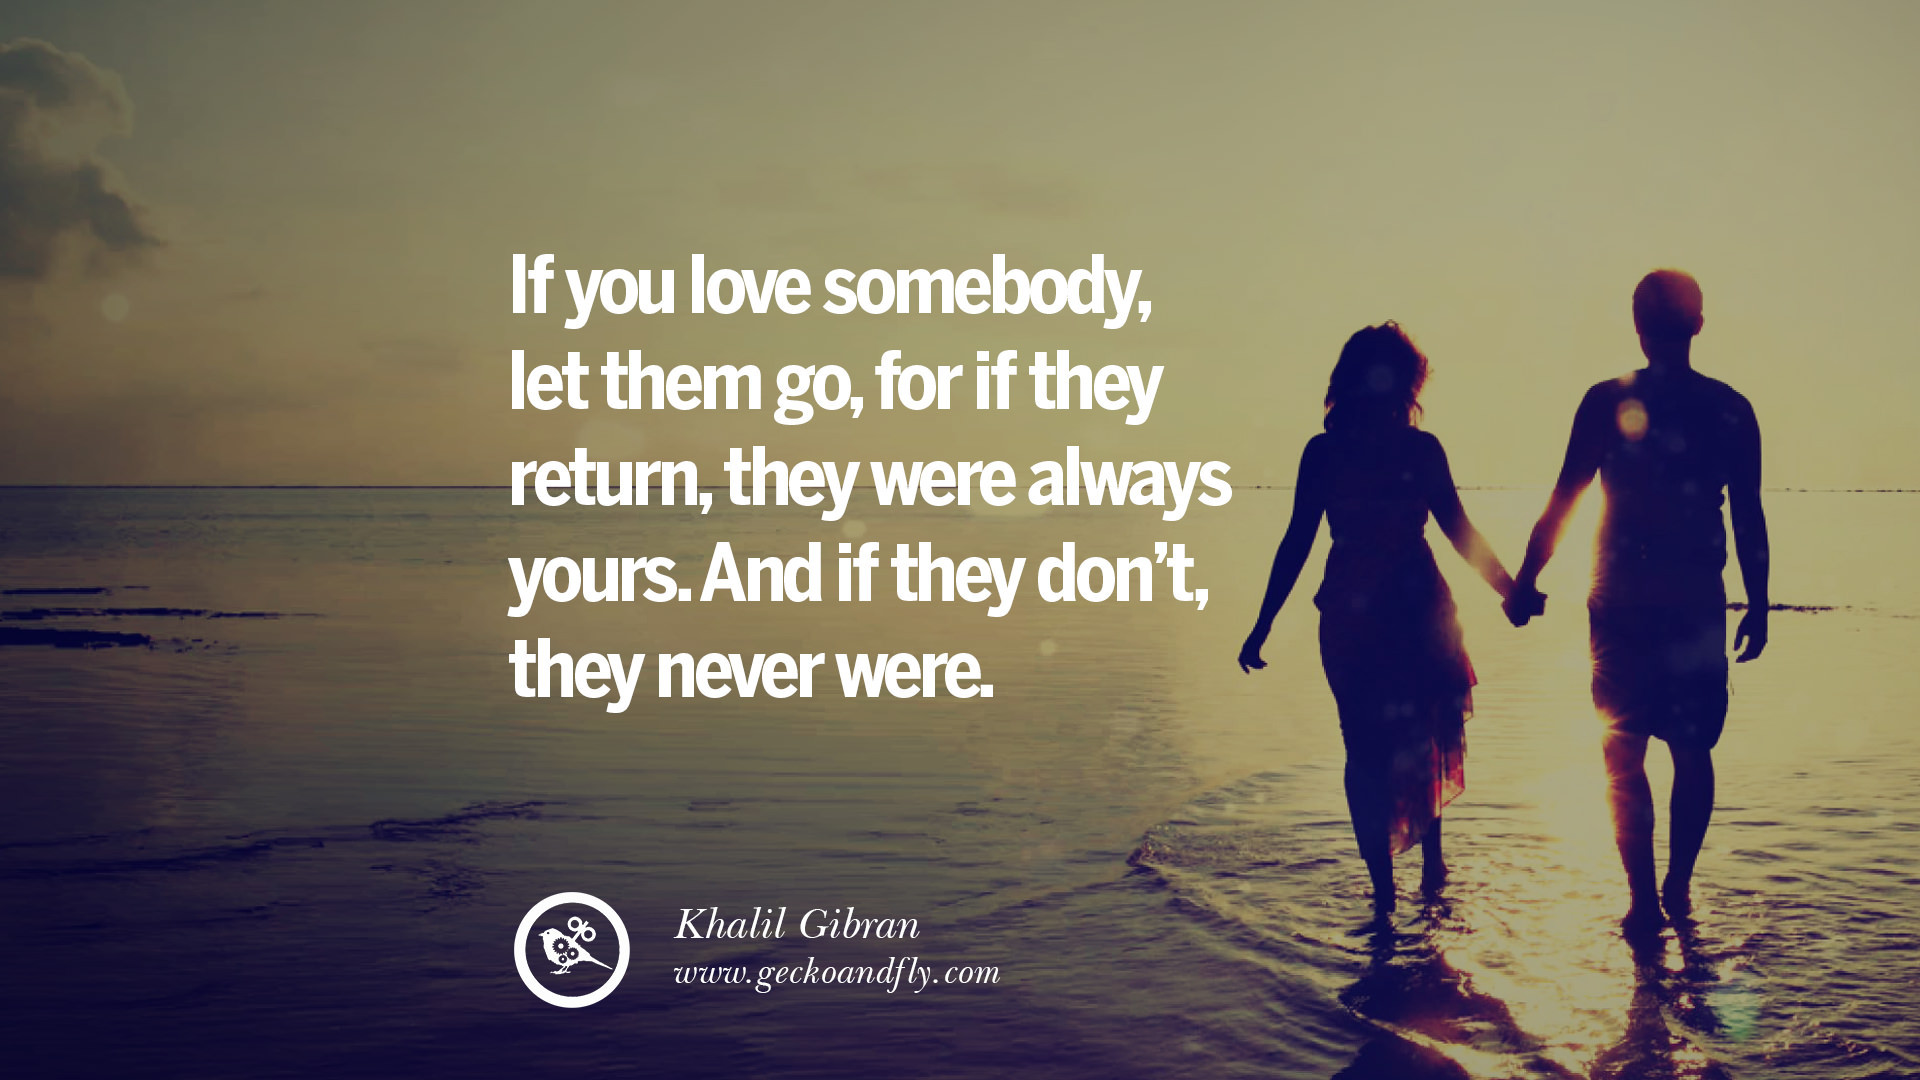 Quotes About Letting Go Of Someone You Love But Can'T Have
 50 Quotes About Moving And Letting Go Relationship